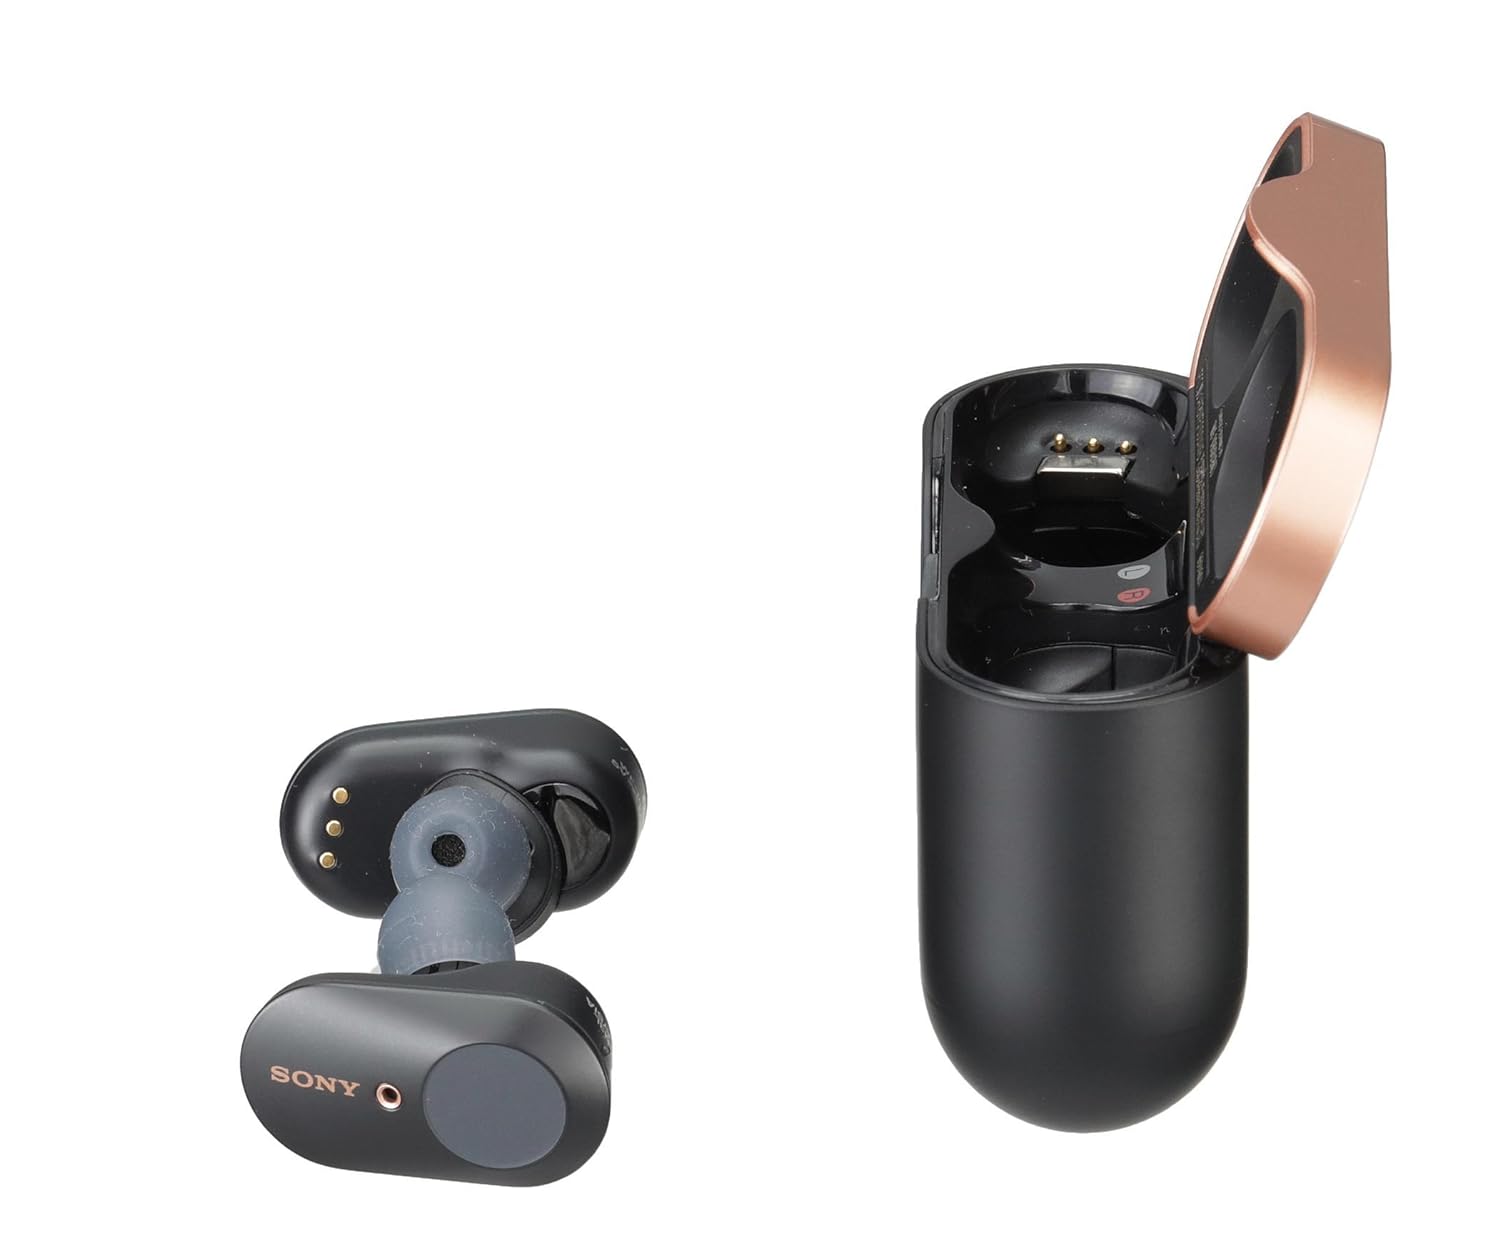 Sony Wireless Earbuds: Pairing Instructions